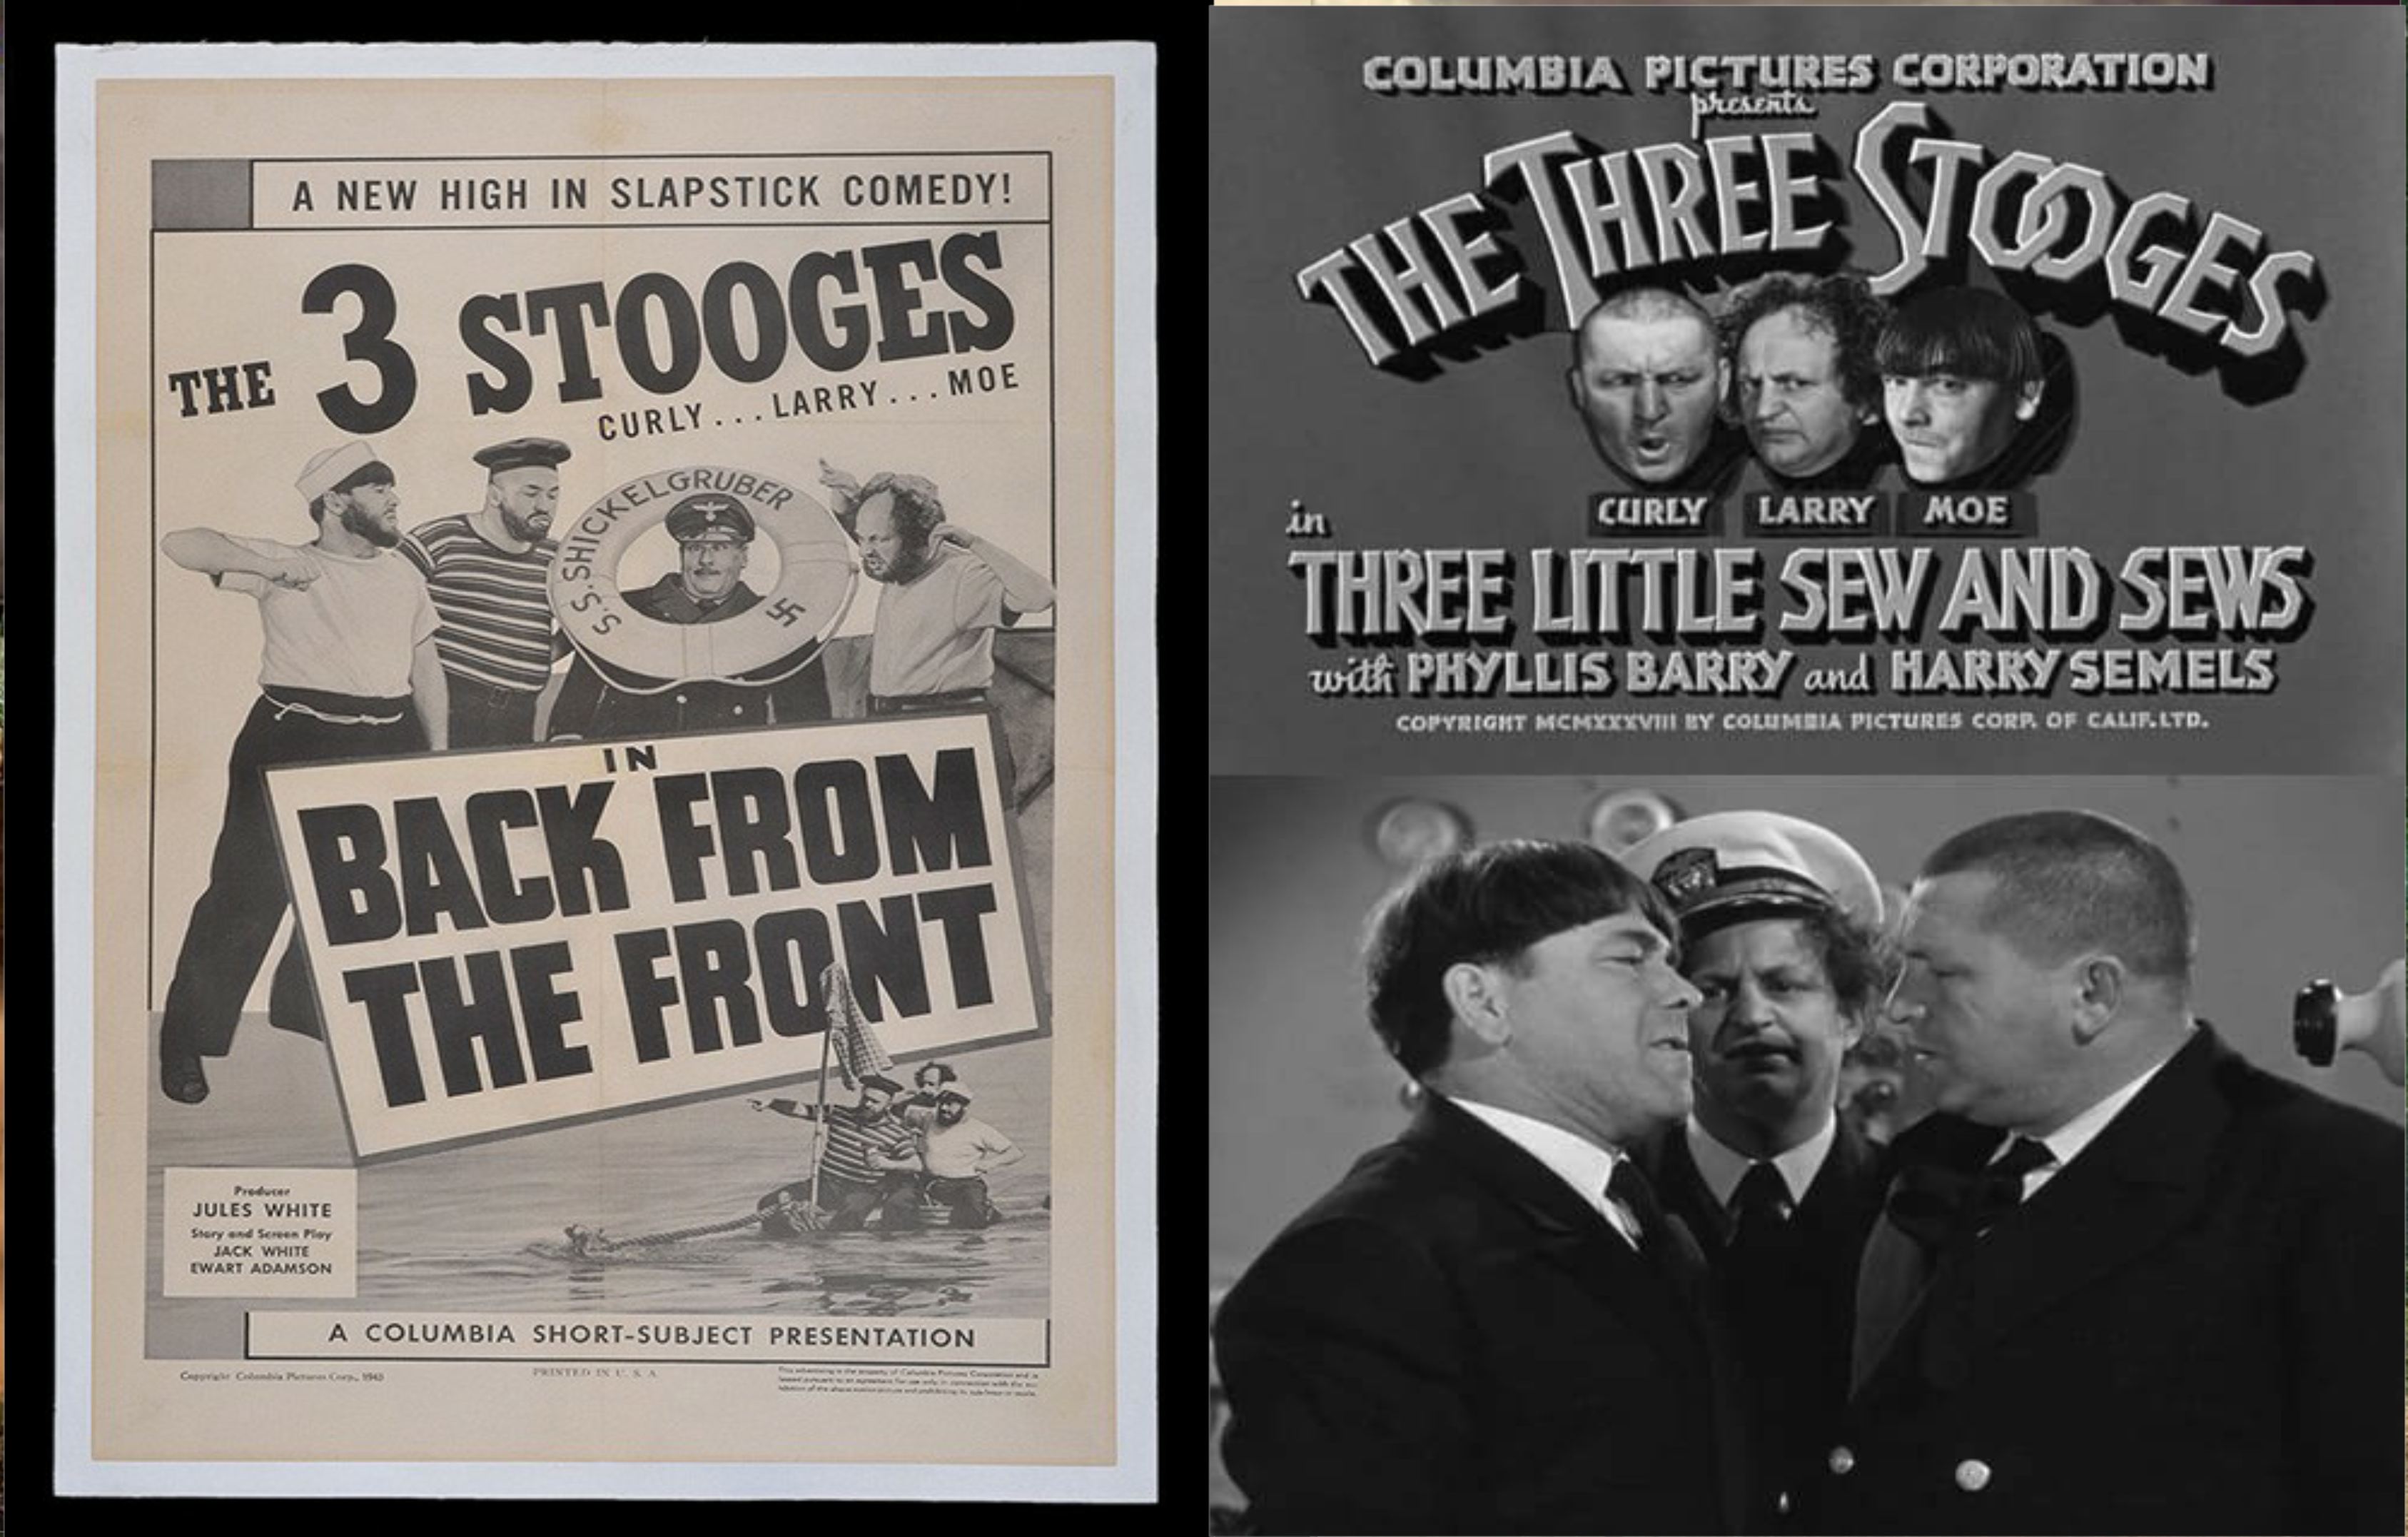 The Three Stooges - Back From the Front (1943) en Three Little Sew and Sews